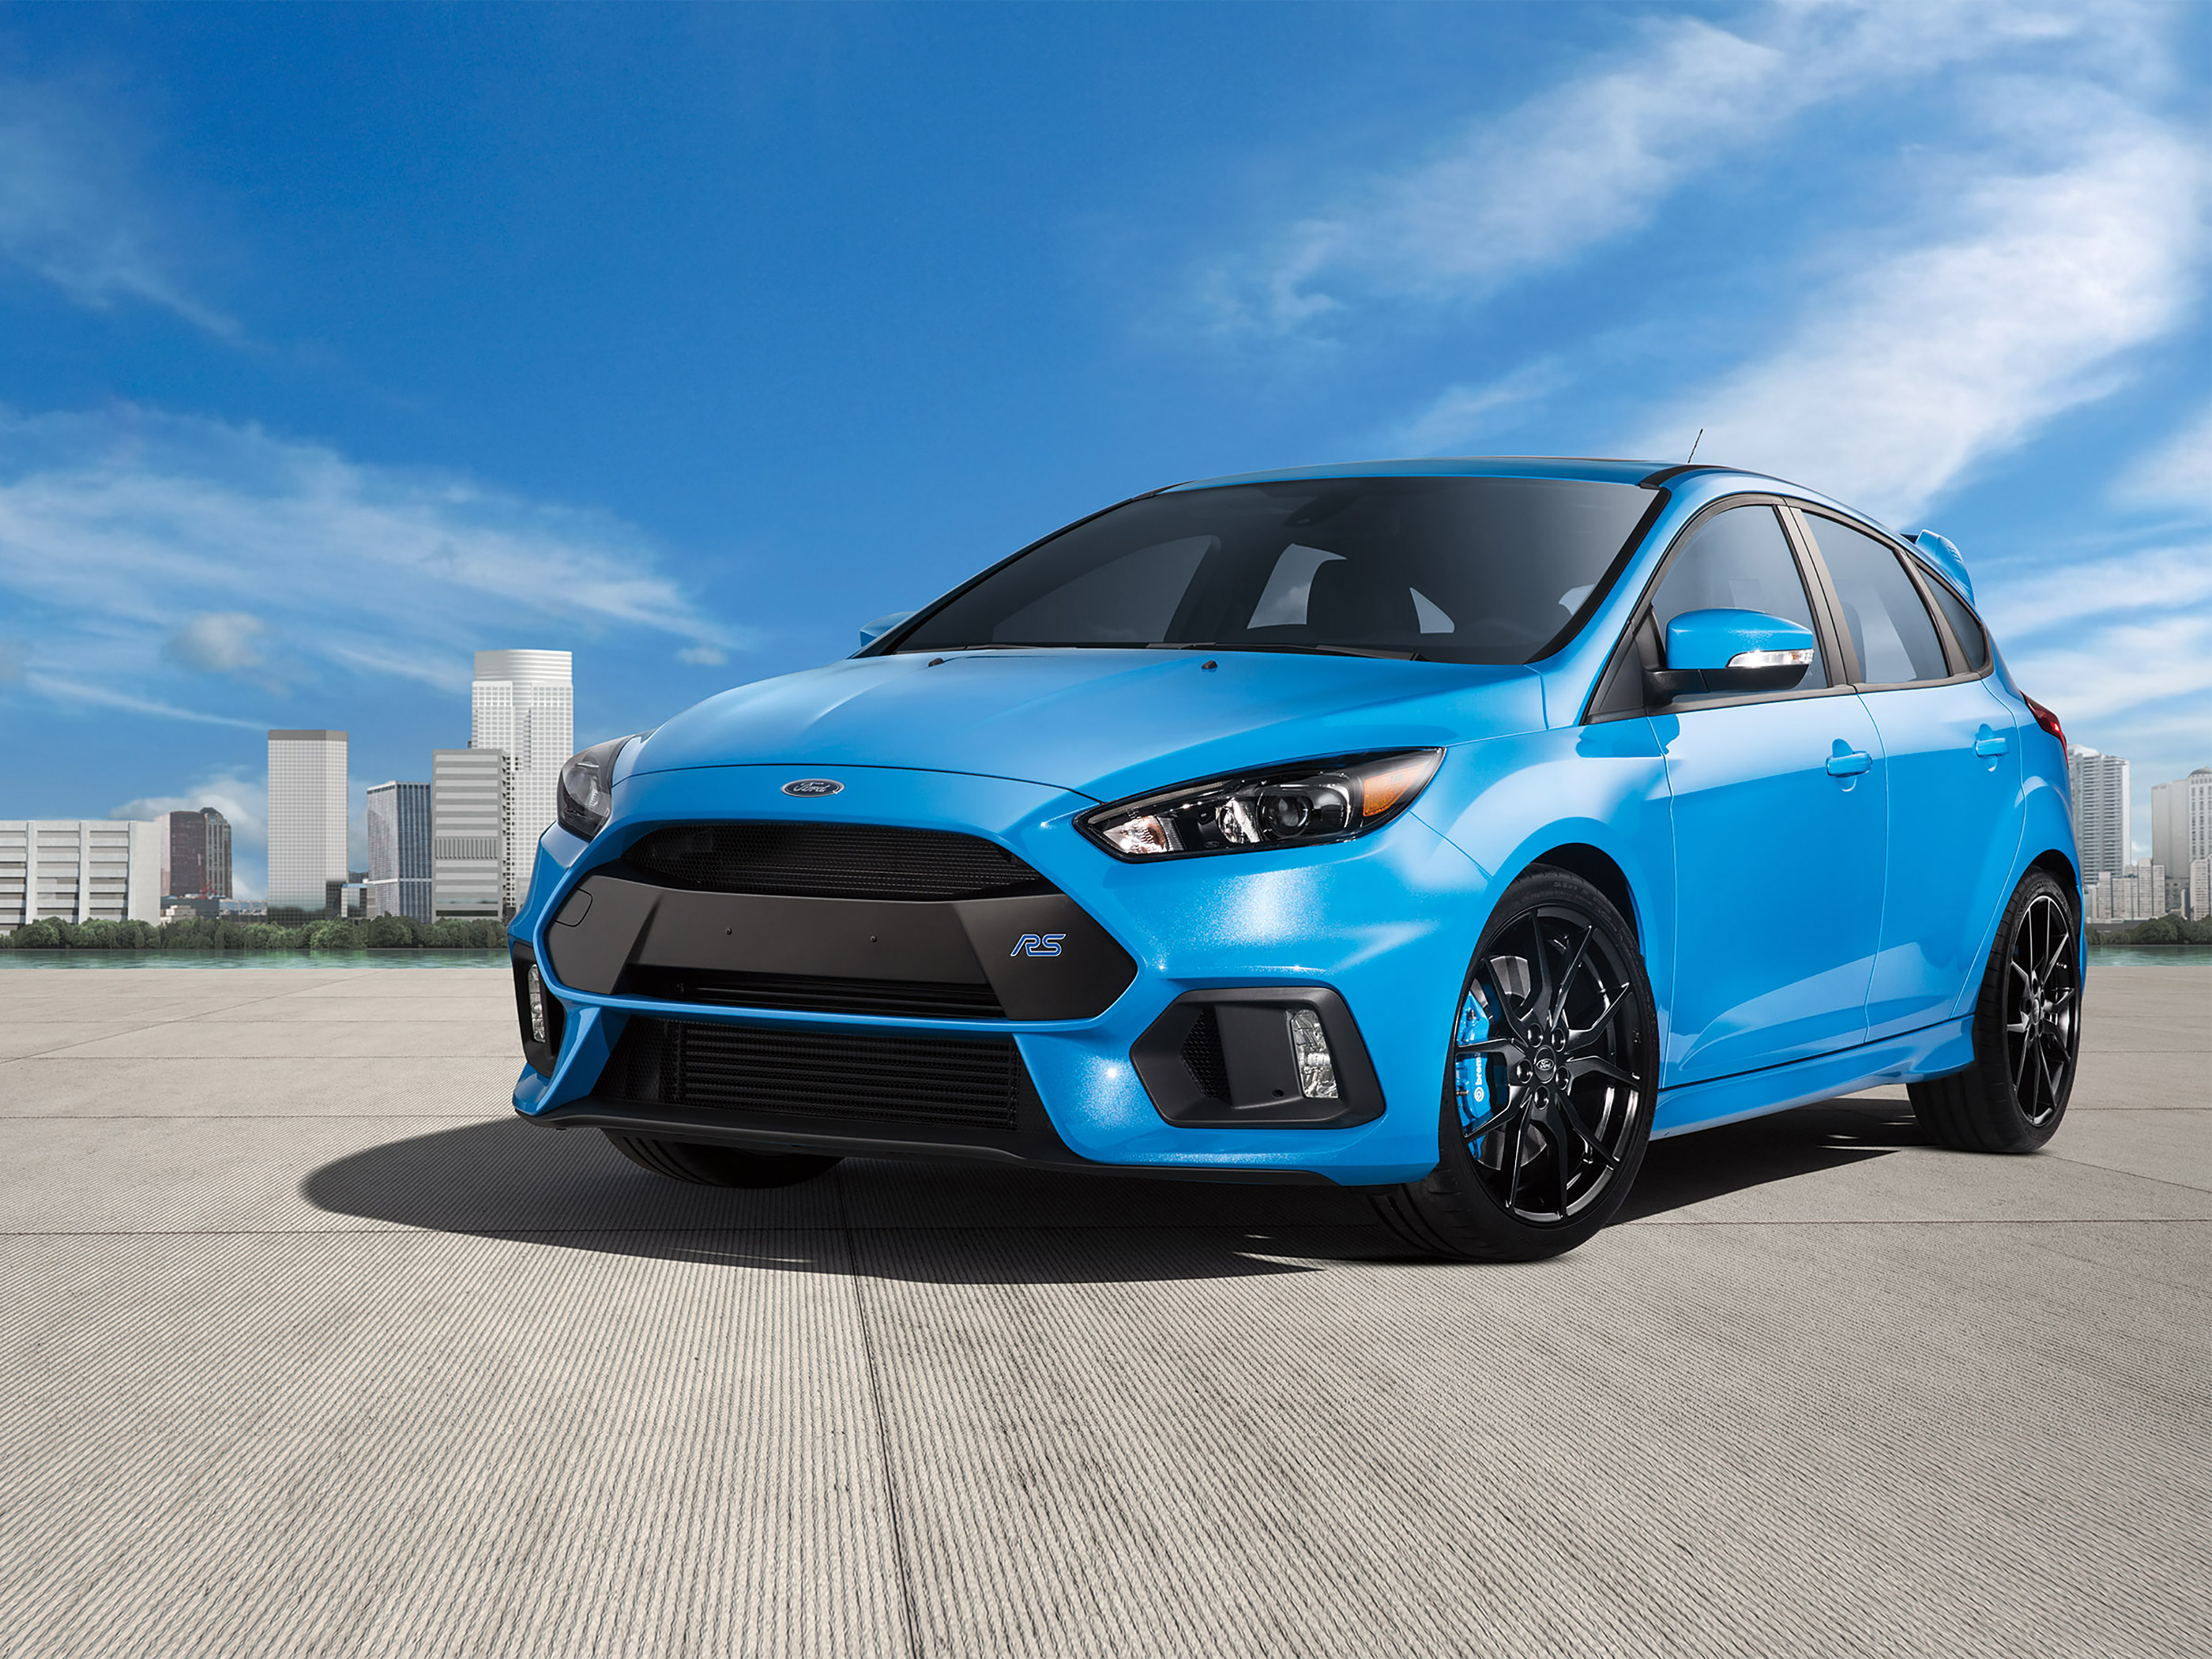  2016 Ford Focus RS Wallpaper.